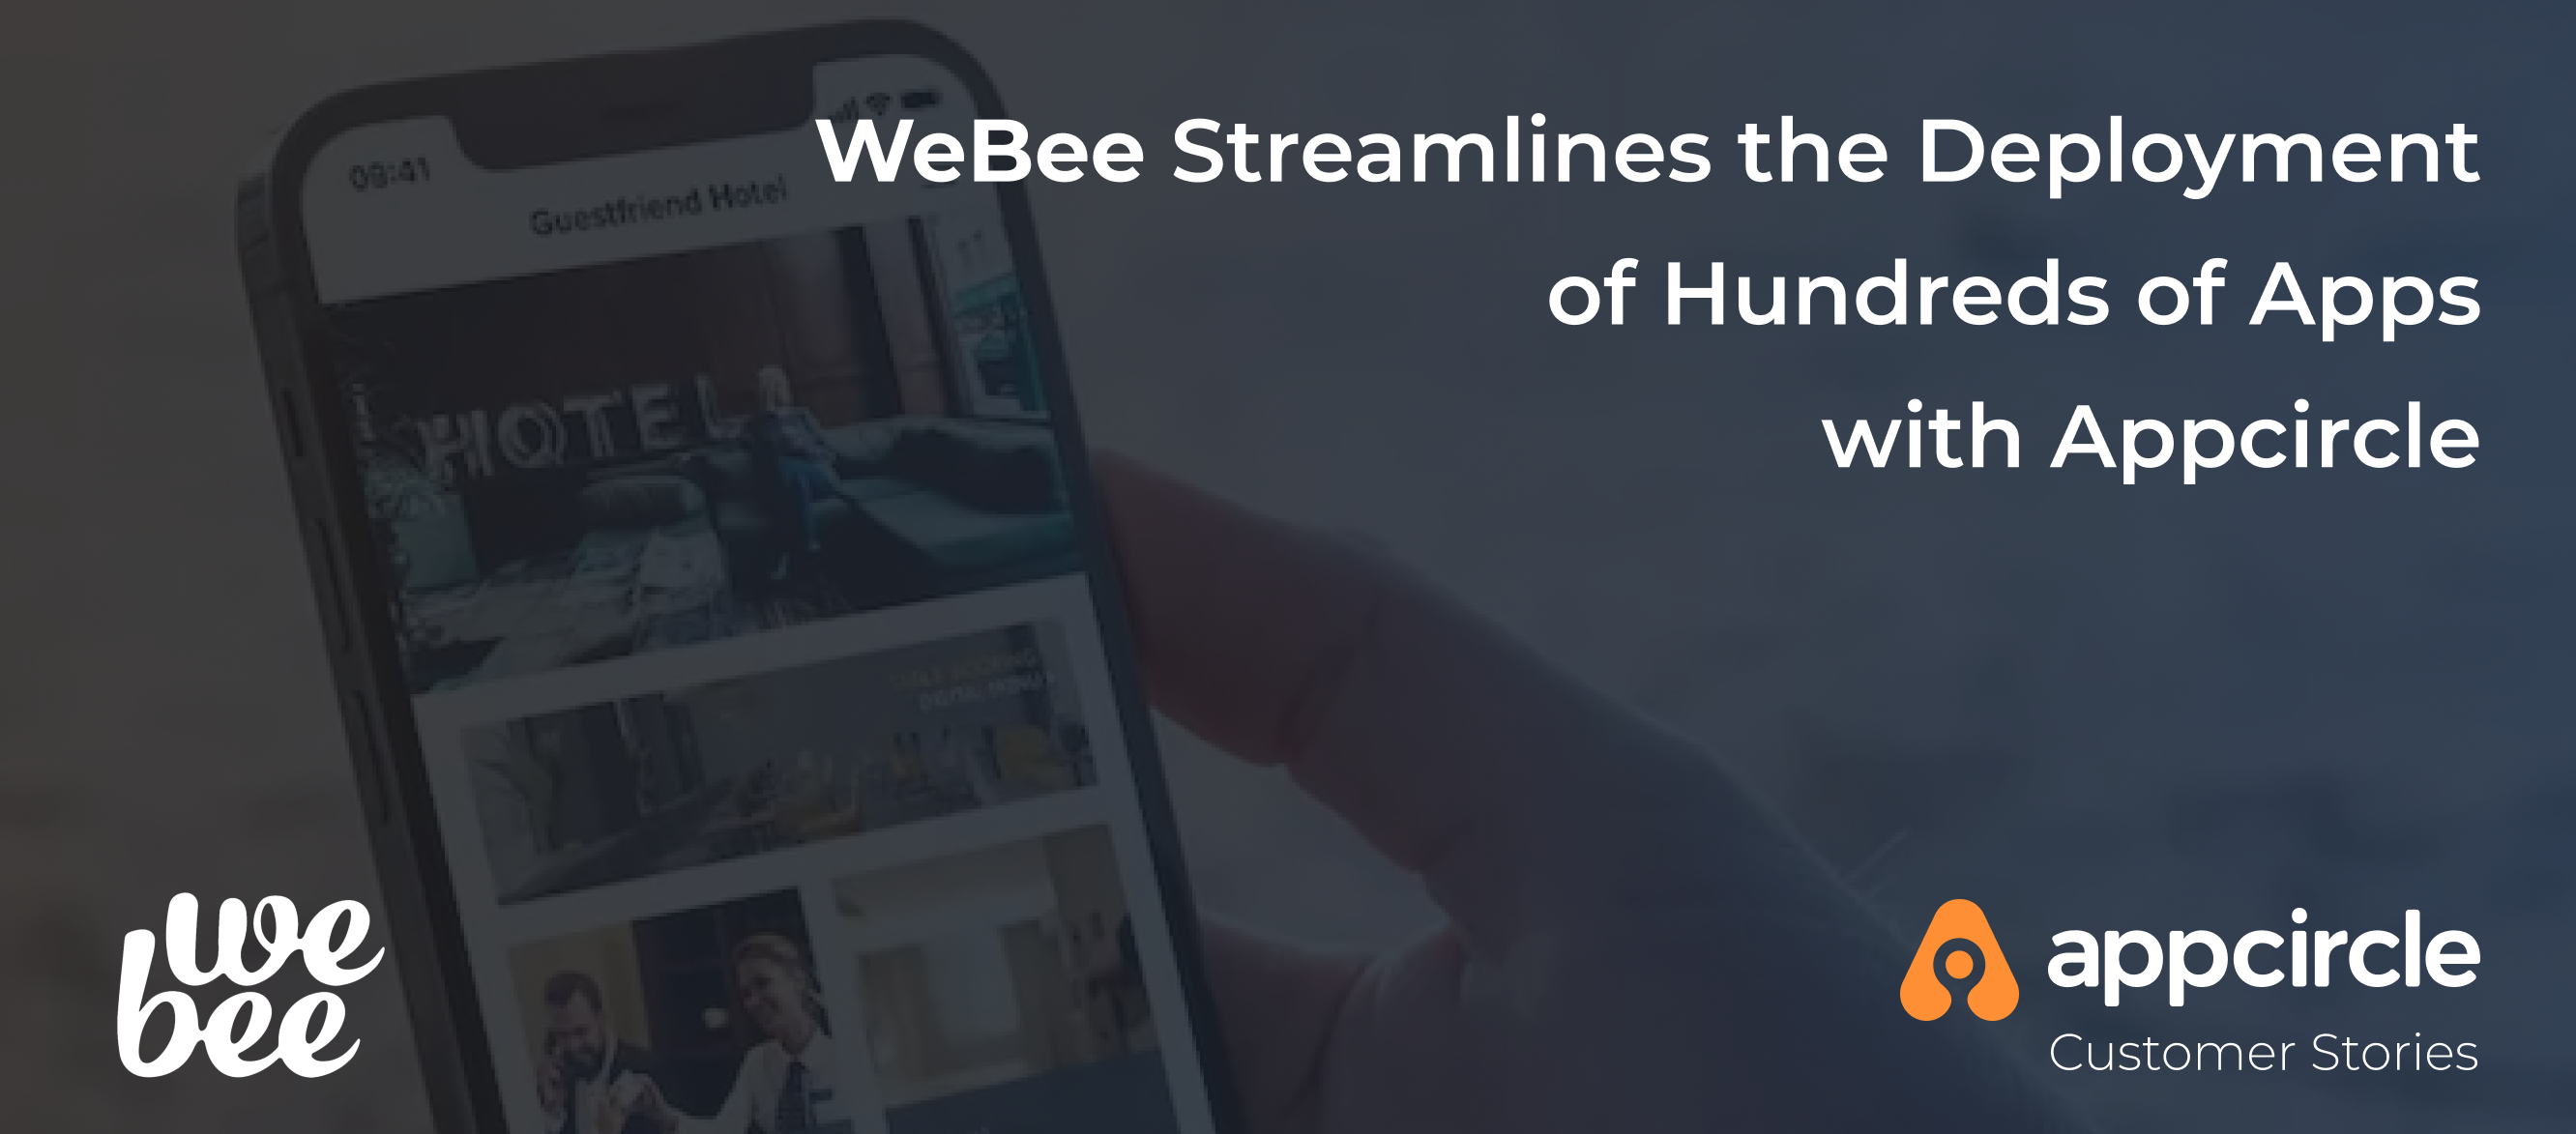 Customer Success Story: WeBee Streamlines the Deployment of Hundreds of Apps with Appcircle